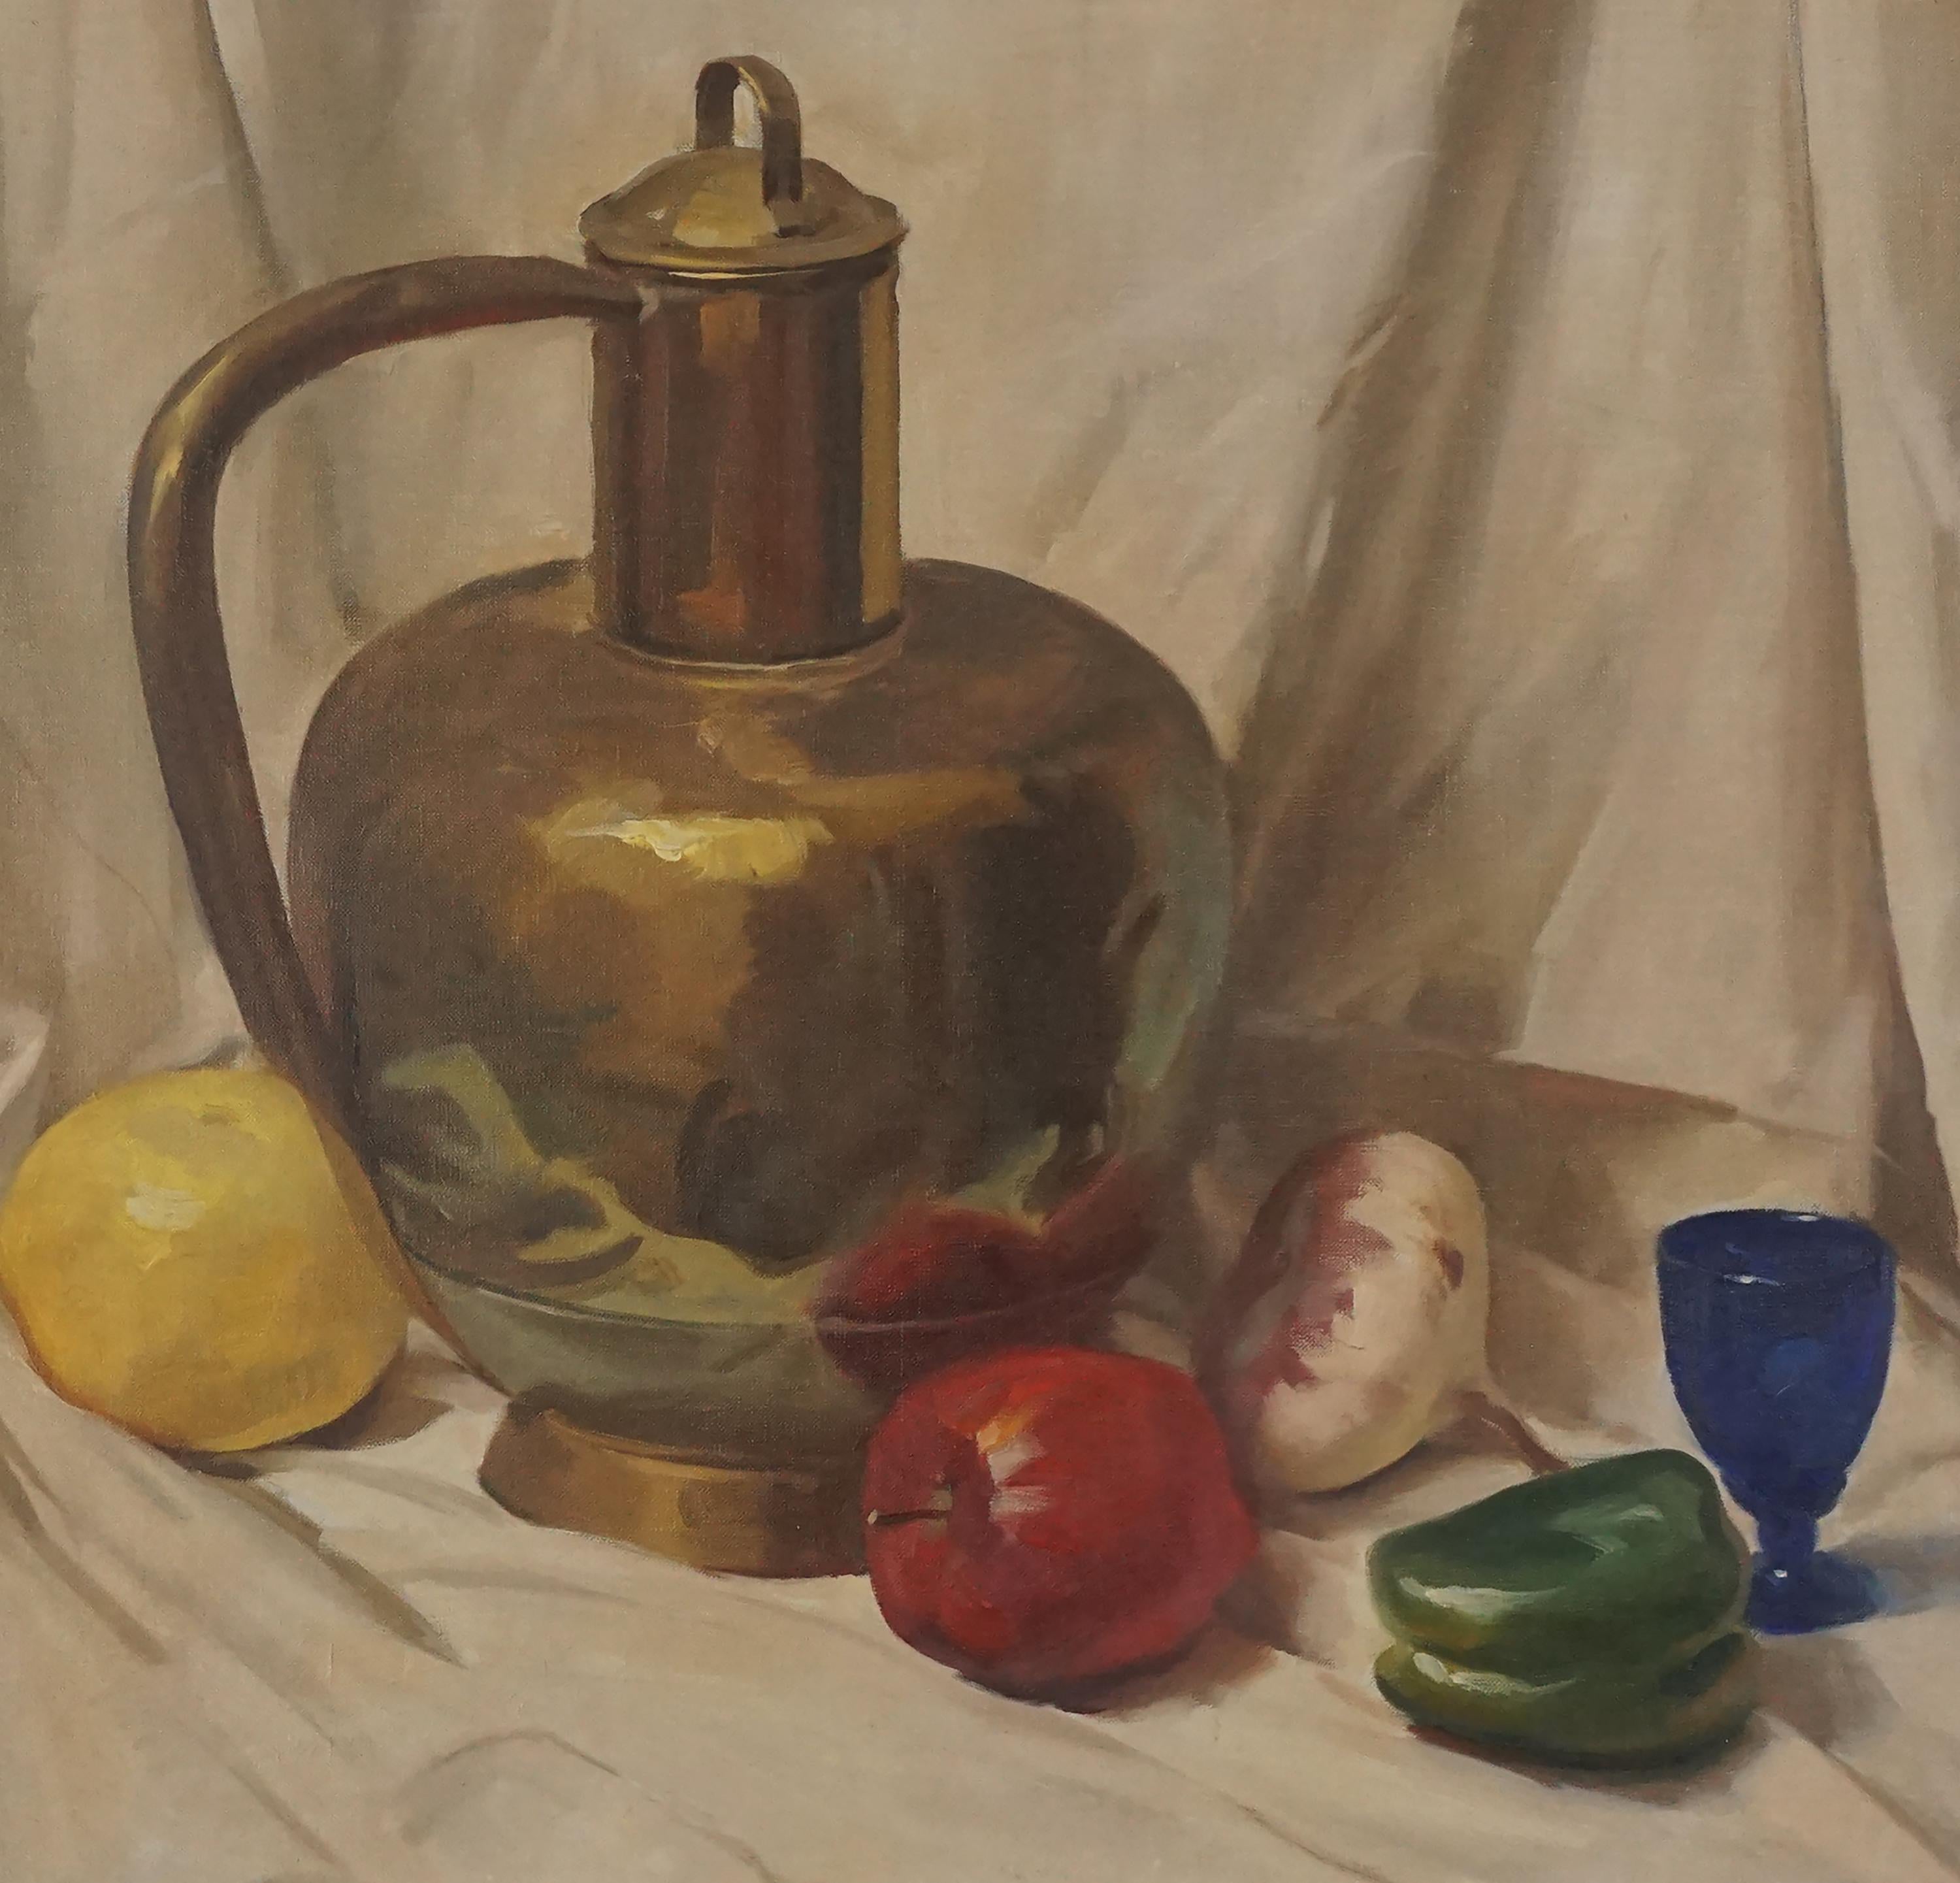 Vintage Mid Century Still Life with Brass Vessel, Fruits and Vegetables  - Painting by Charles Kinghan